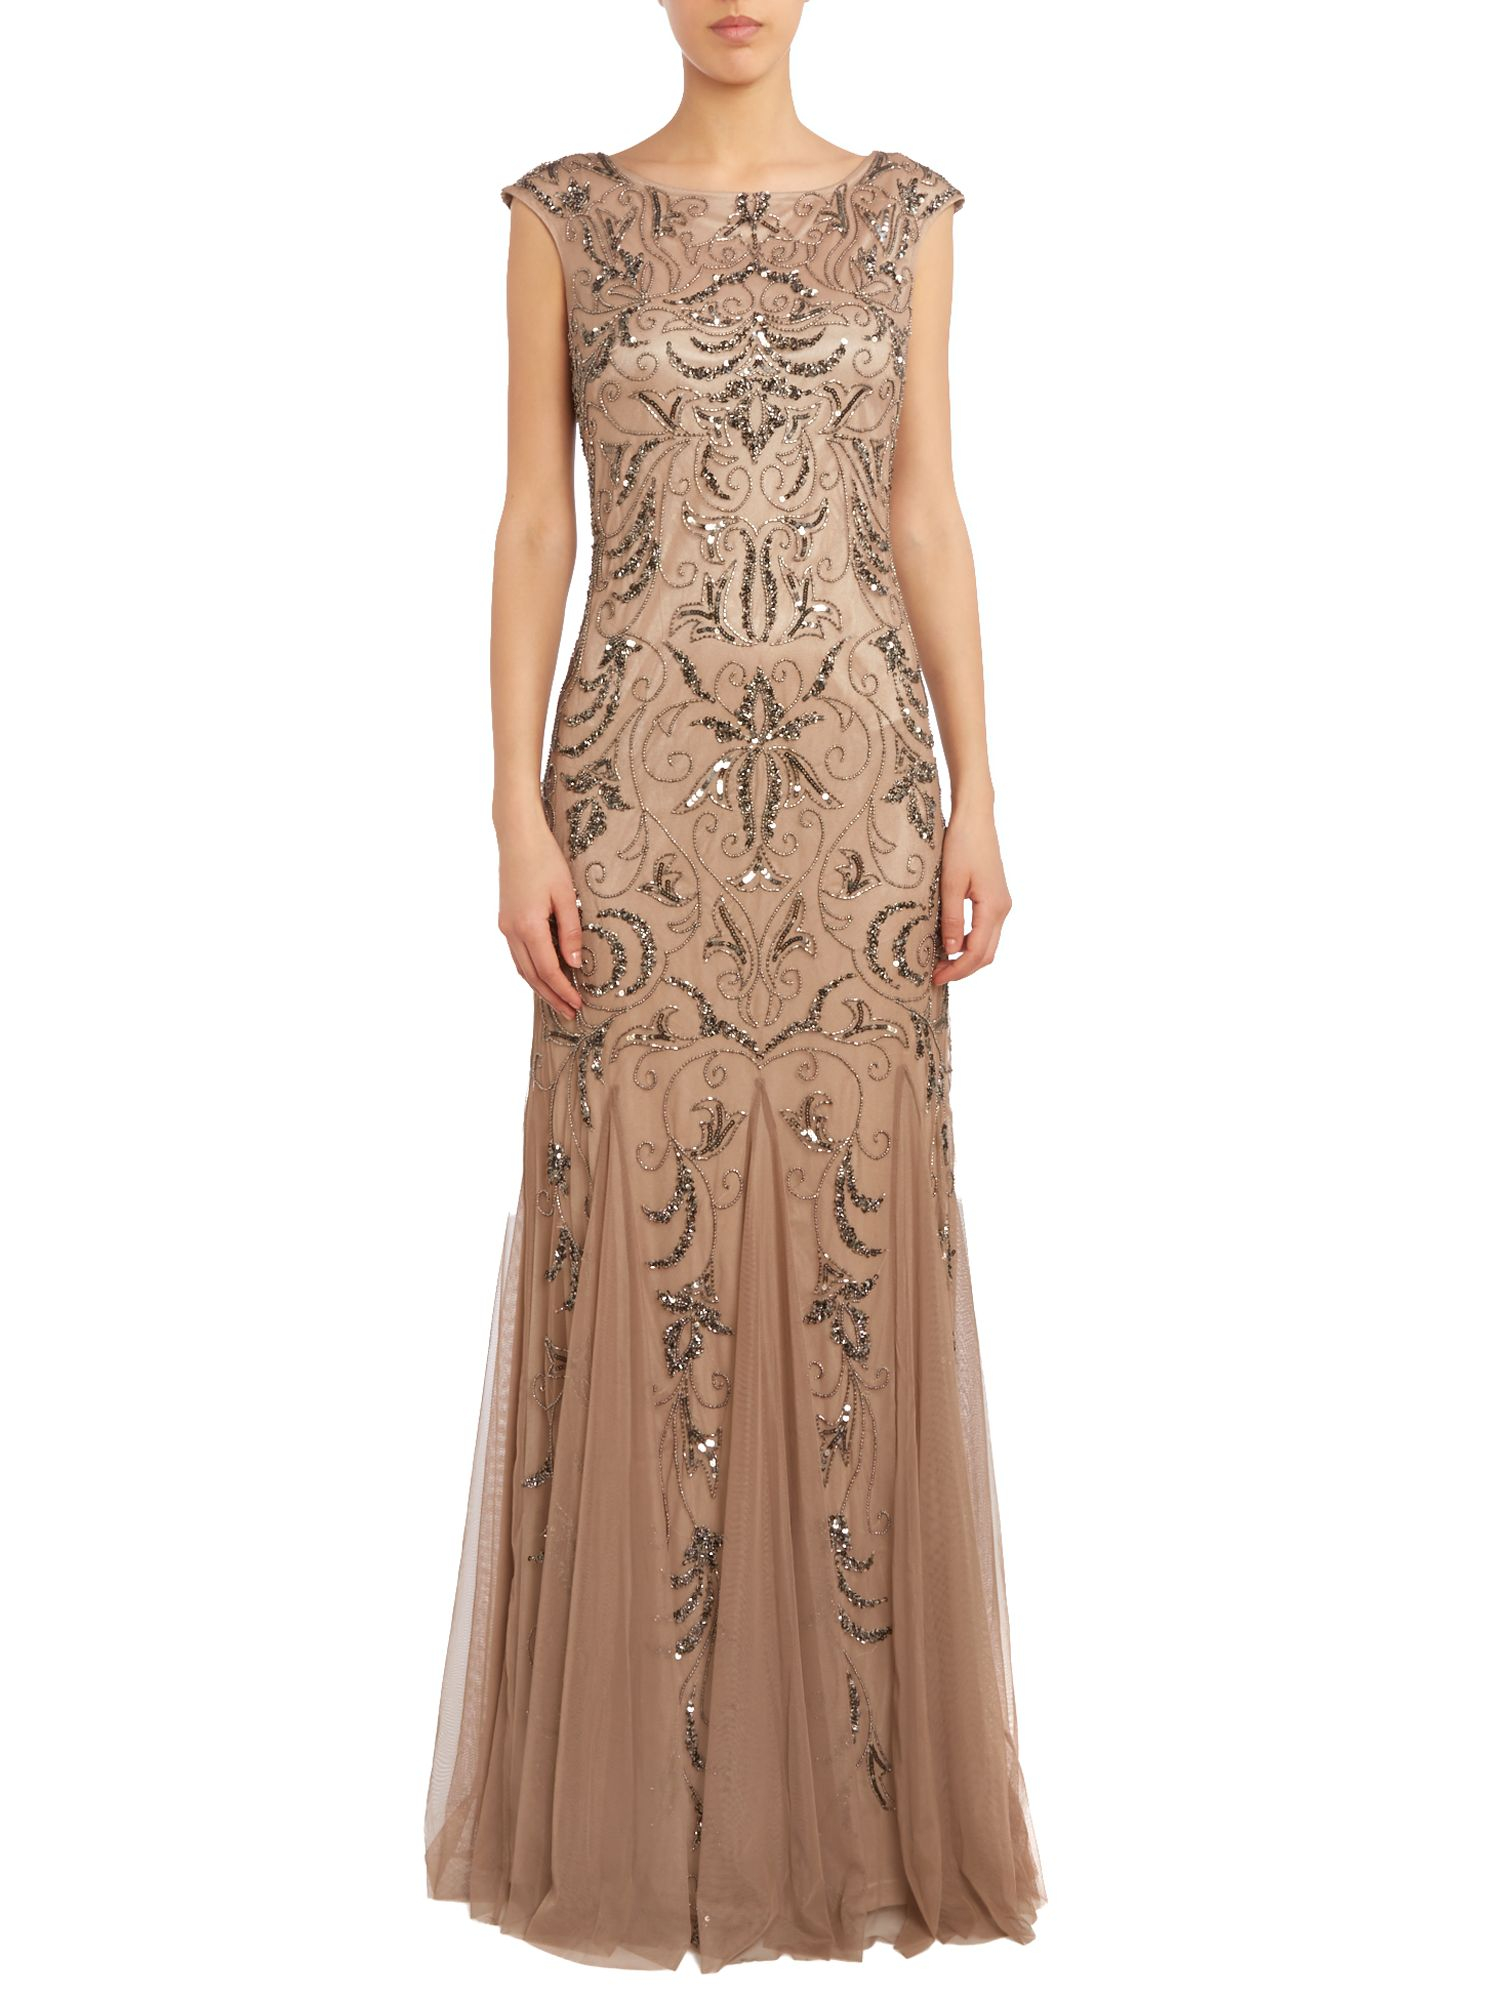 Adrianna papell Cap Sleeve Beaded Dress in Brown (Buff) | Lyst